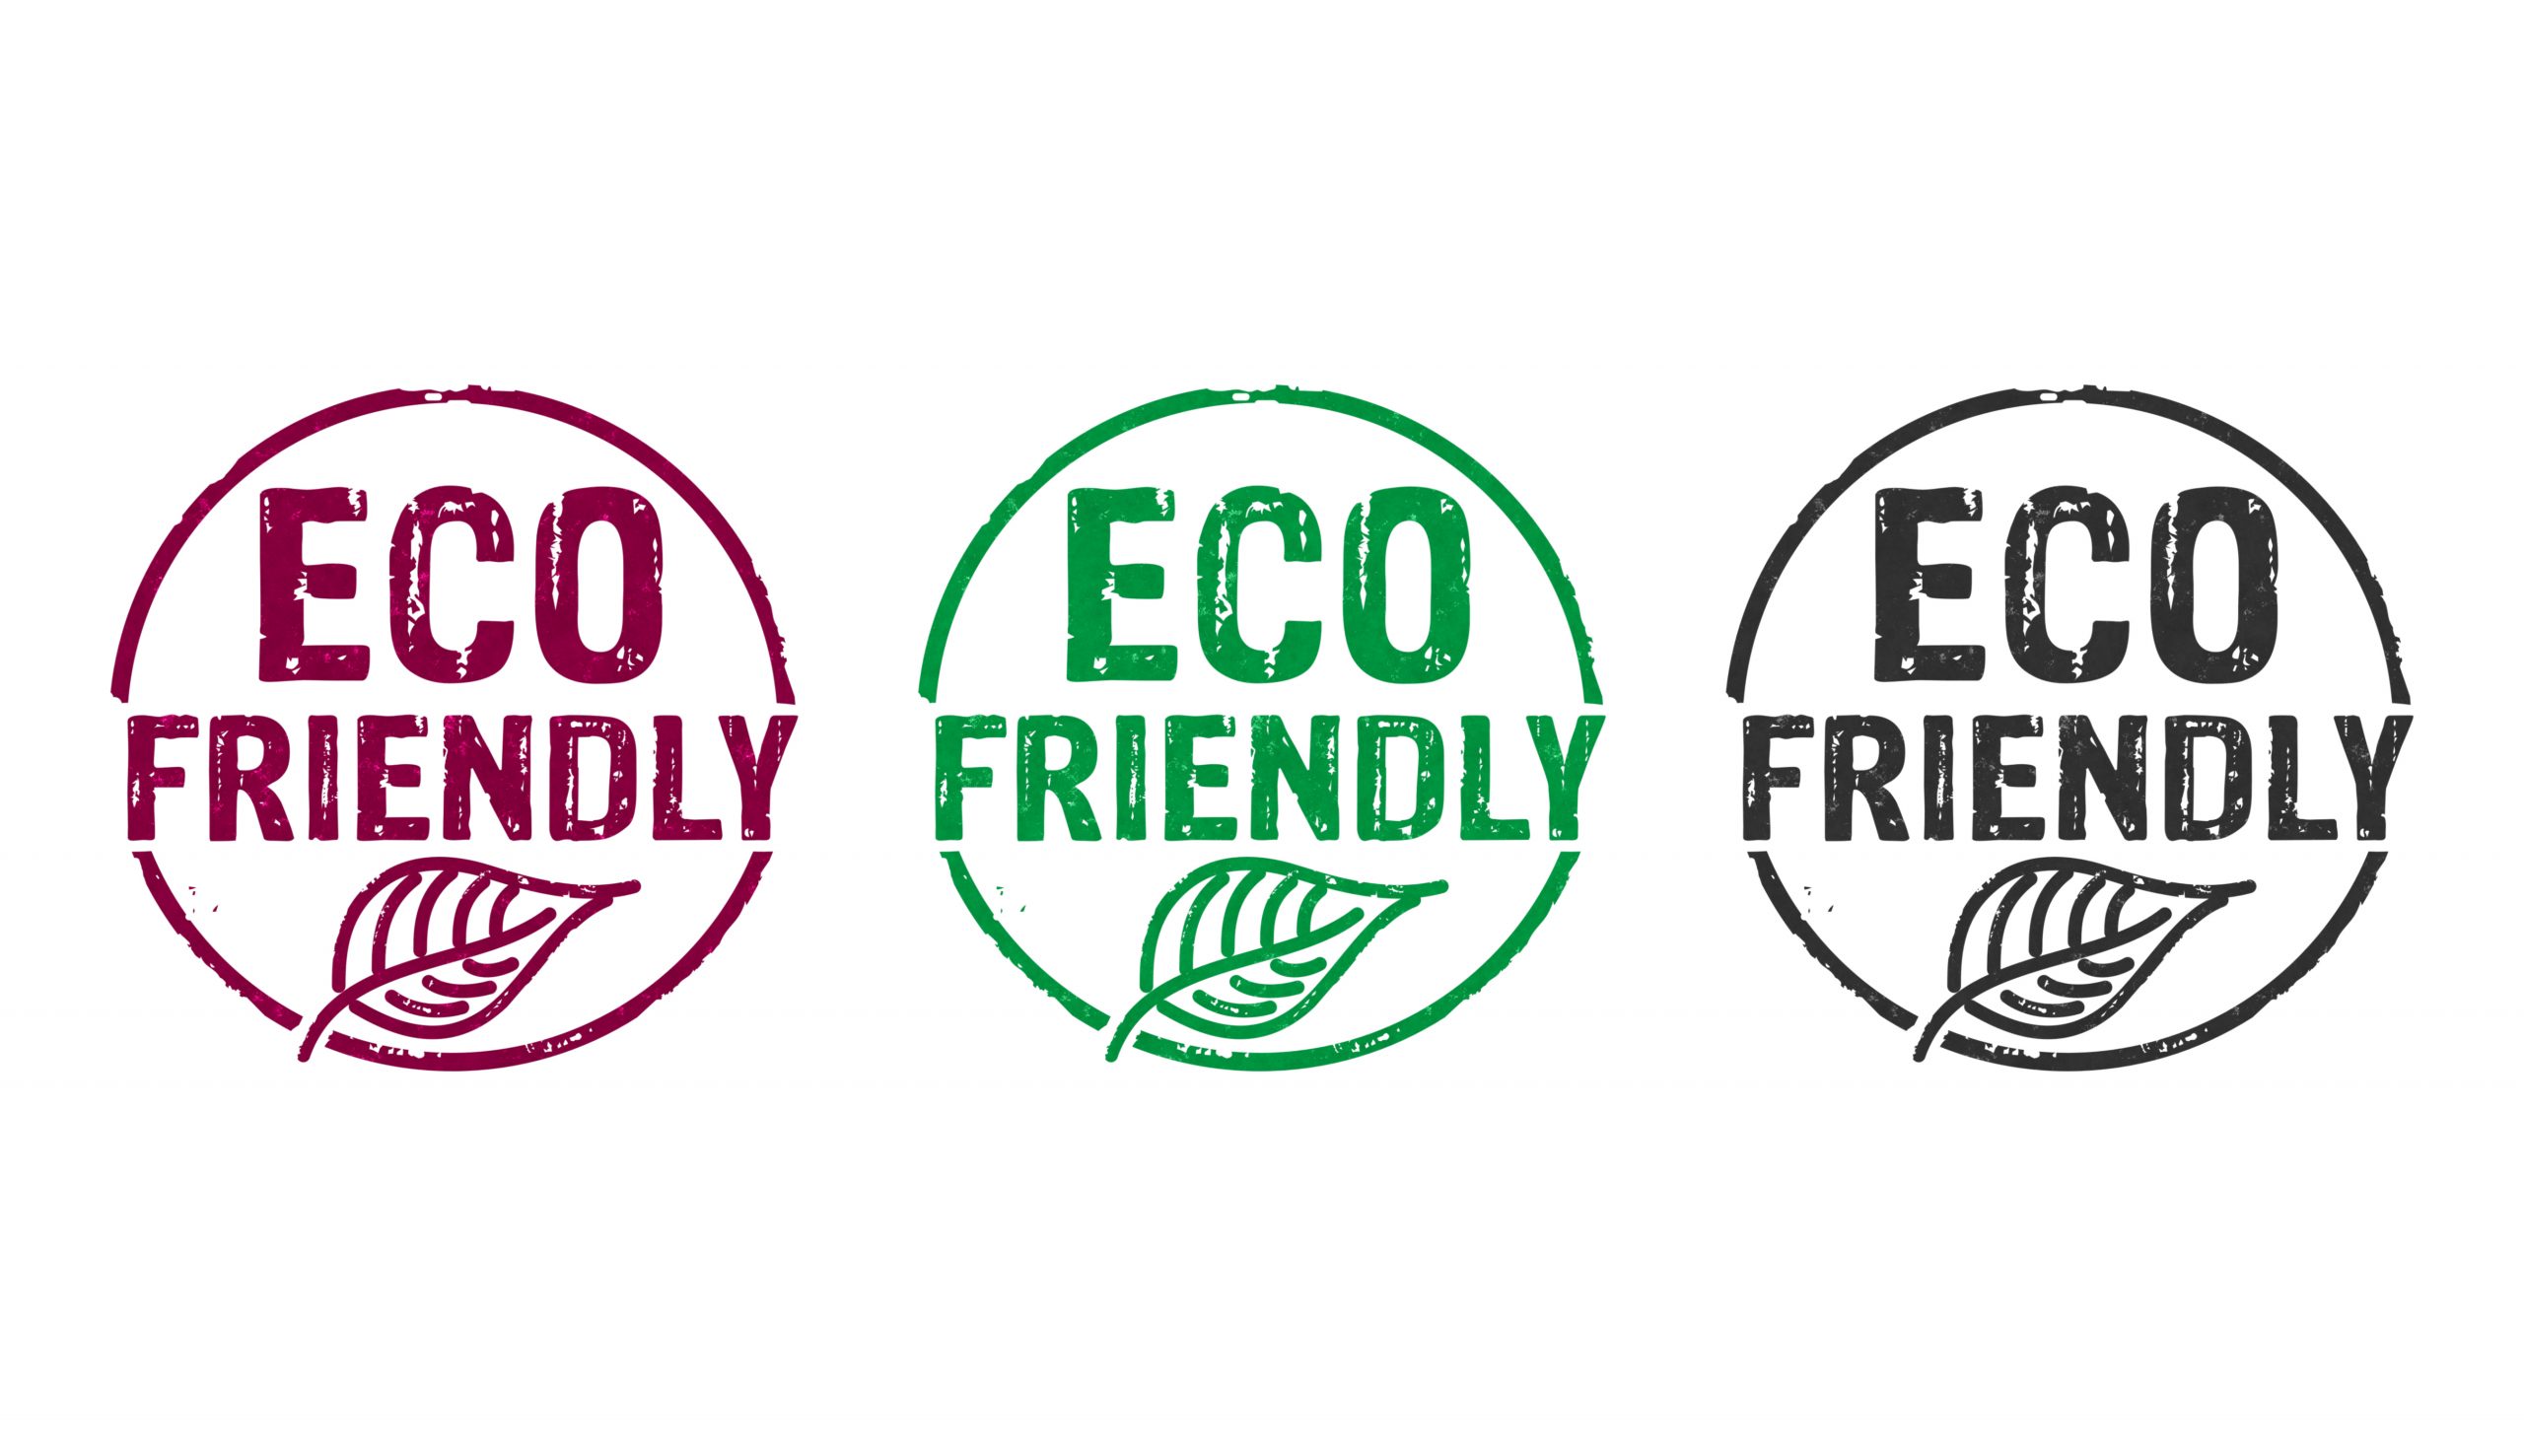 Eco friendly stamp icons in few color versions.